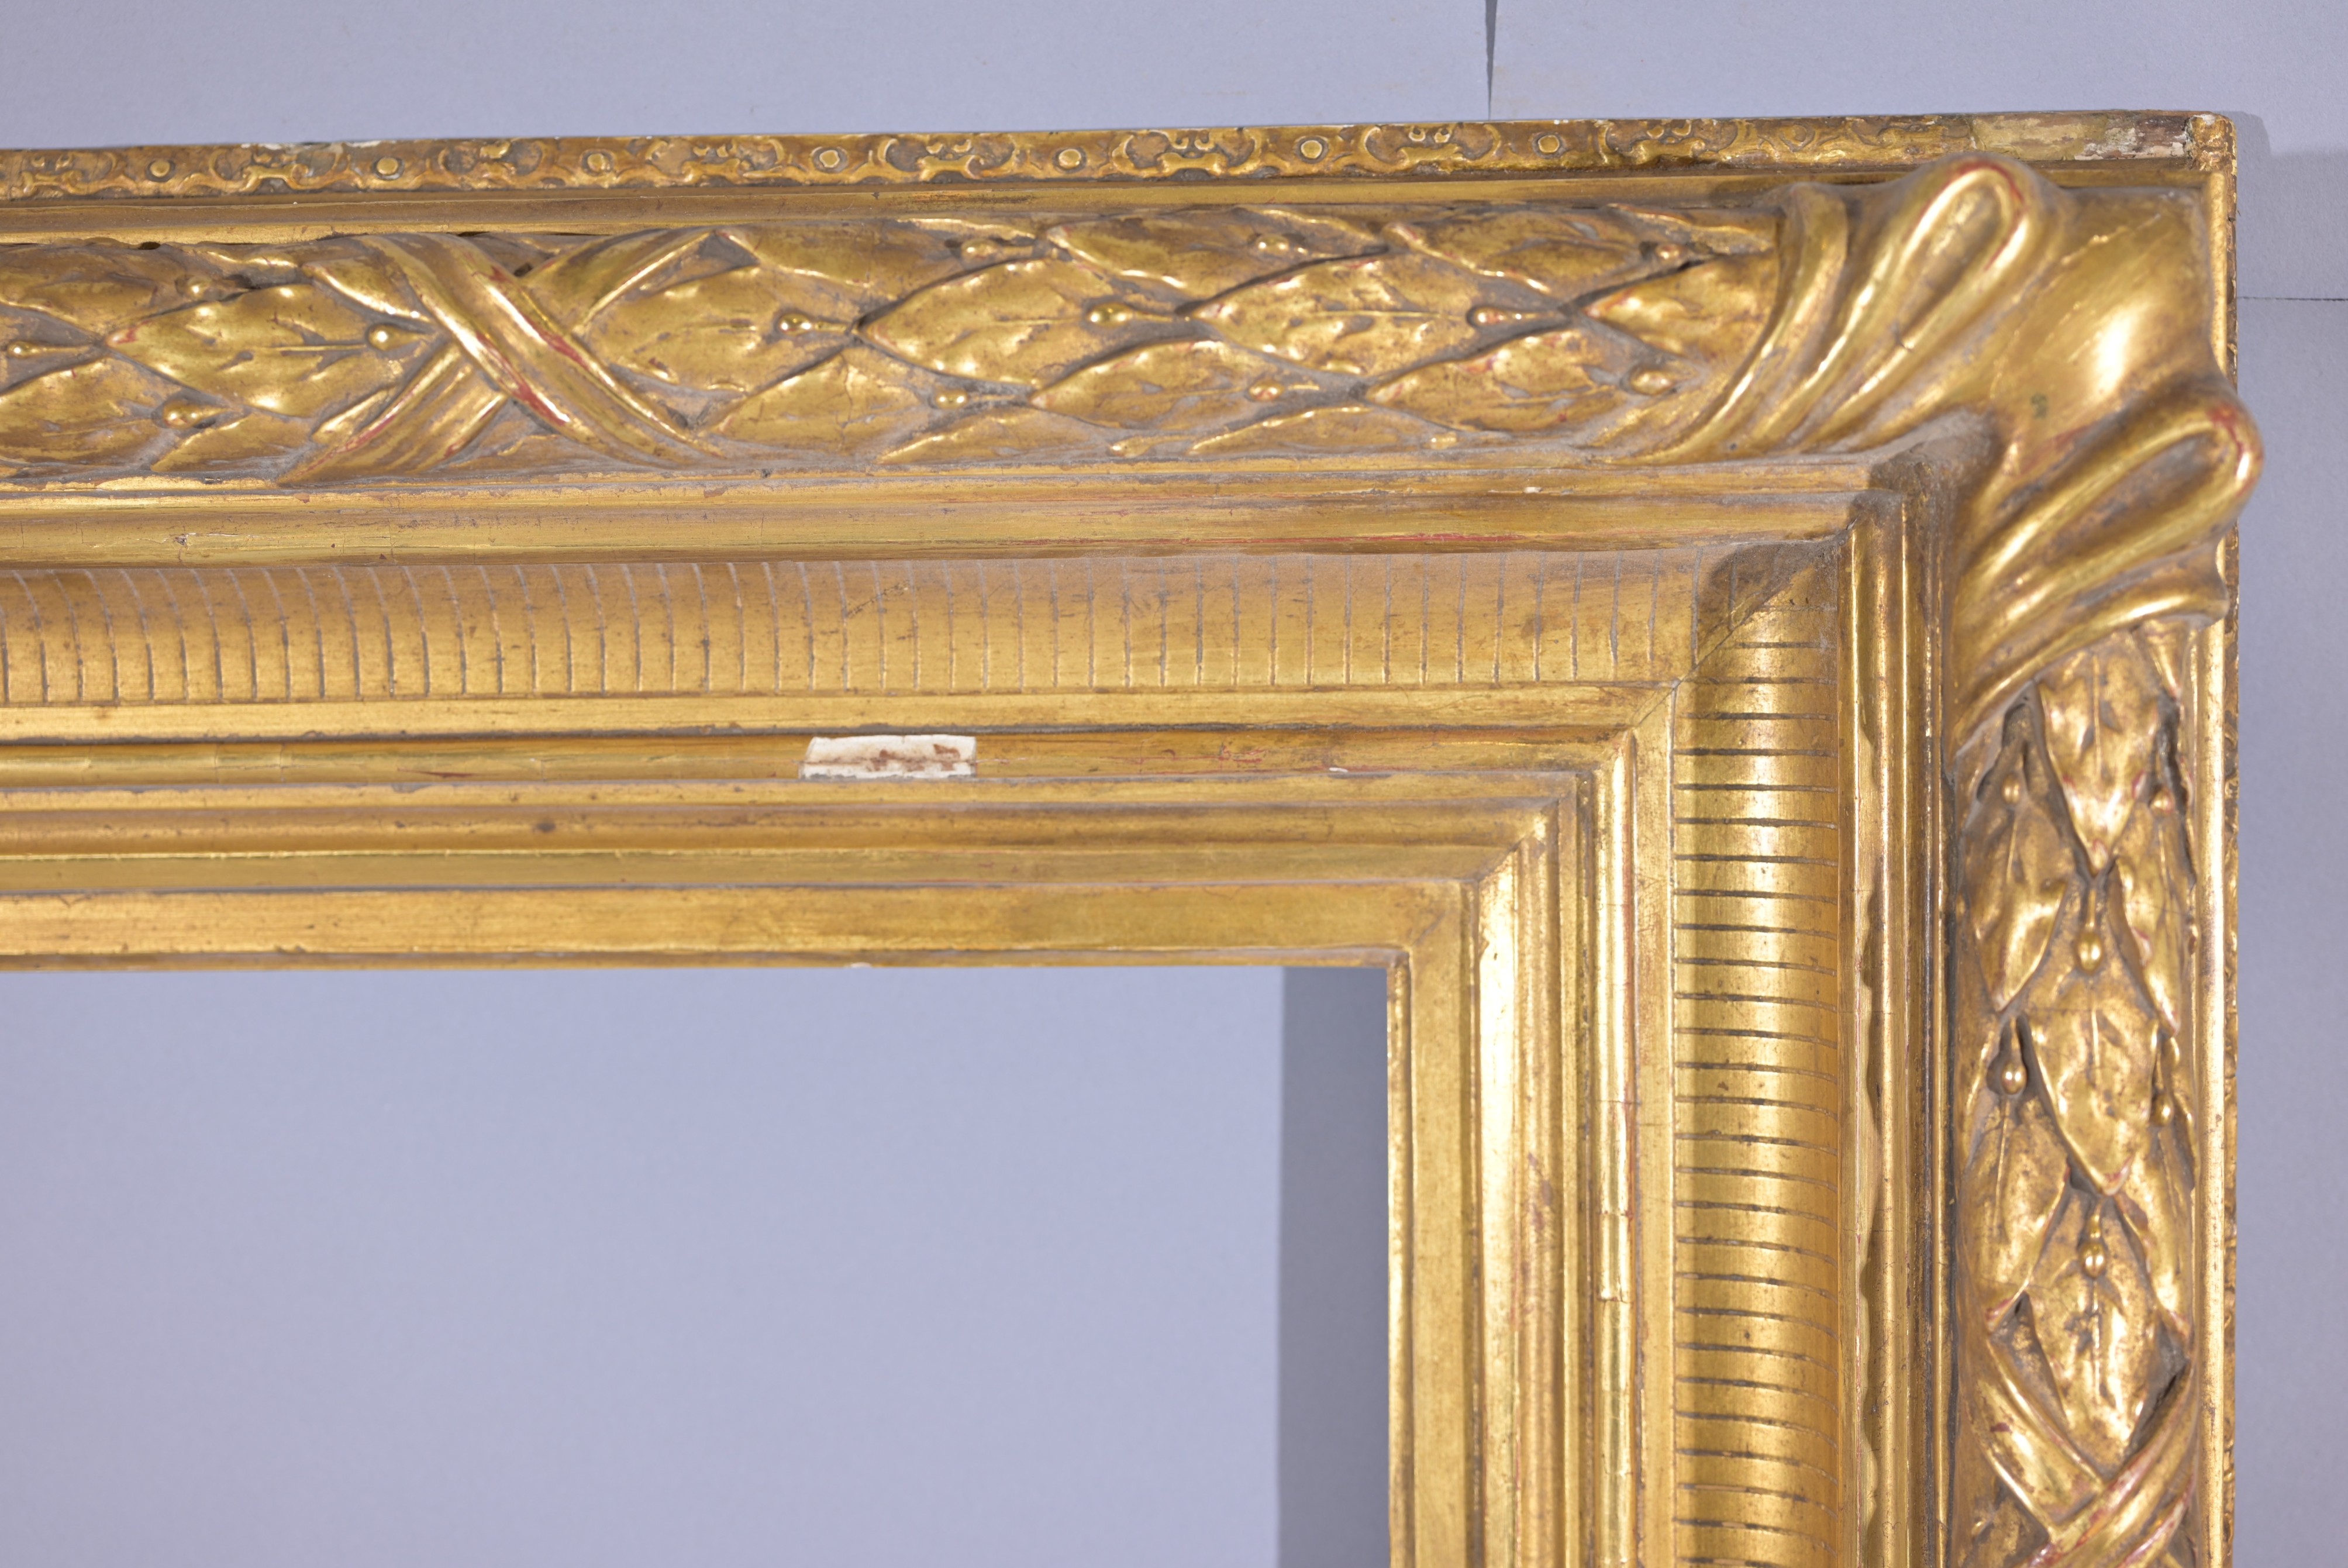 Large 19th C. Gilt/Fluted Cove Frame - 45.5 x 34.5 - Image 4 of 7